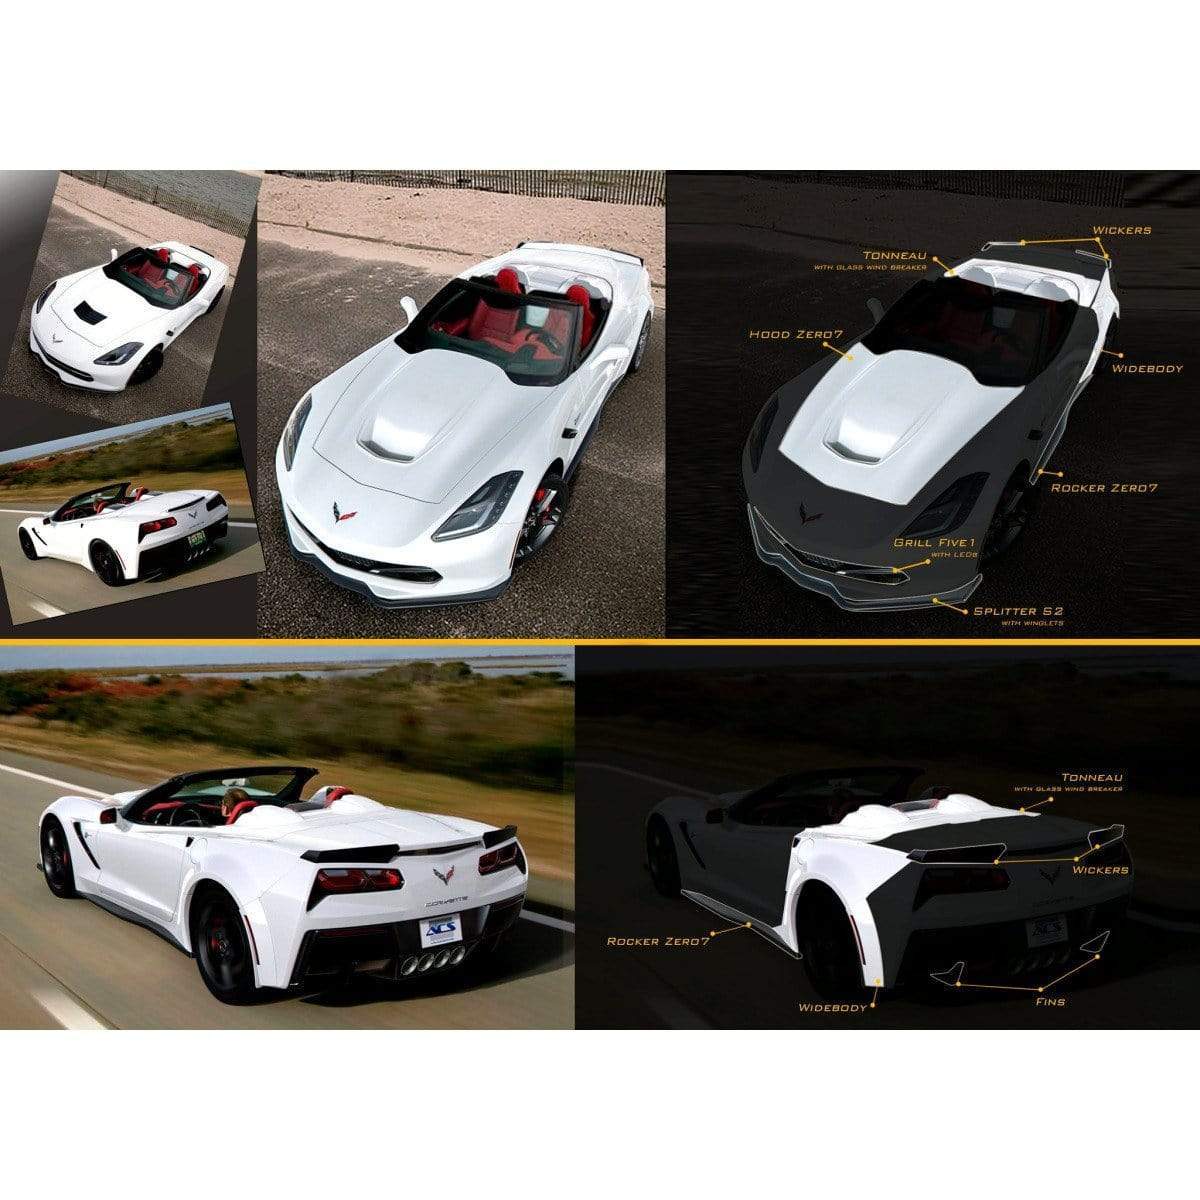 ACS Composite Convertible Rear Widebody Kit for C7 Corvette Stingray 45-4-101 PRM - Adds 40mm Width, Accommodates 20x12 Wheels and P335-25-20 Tires, Improved Traction and Handling